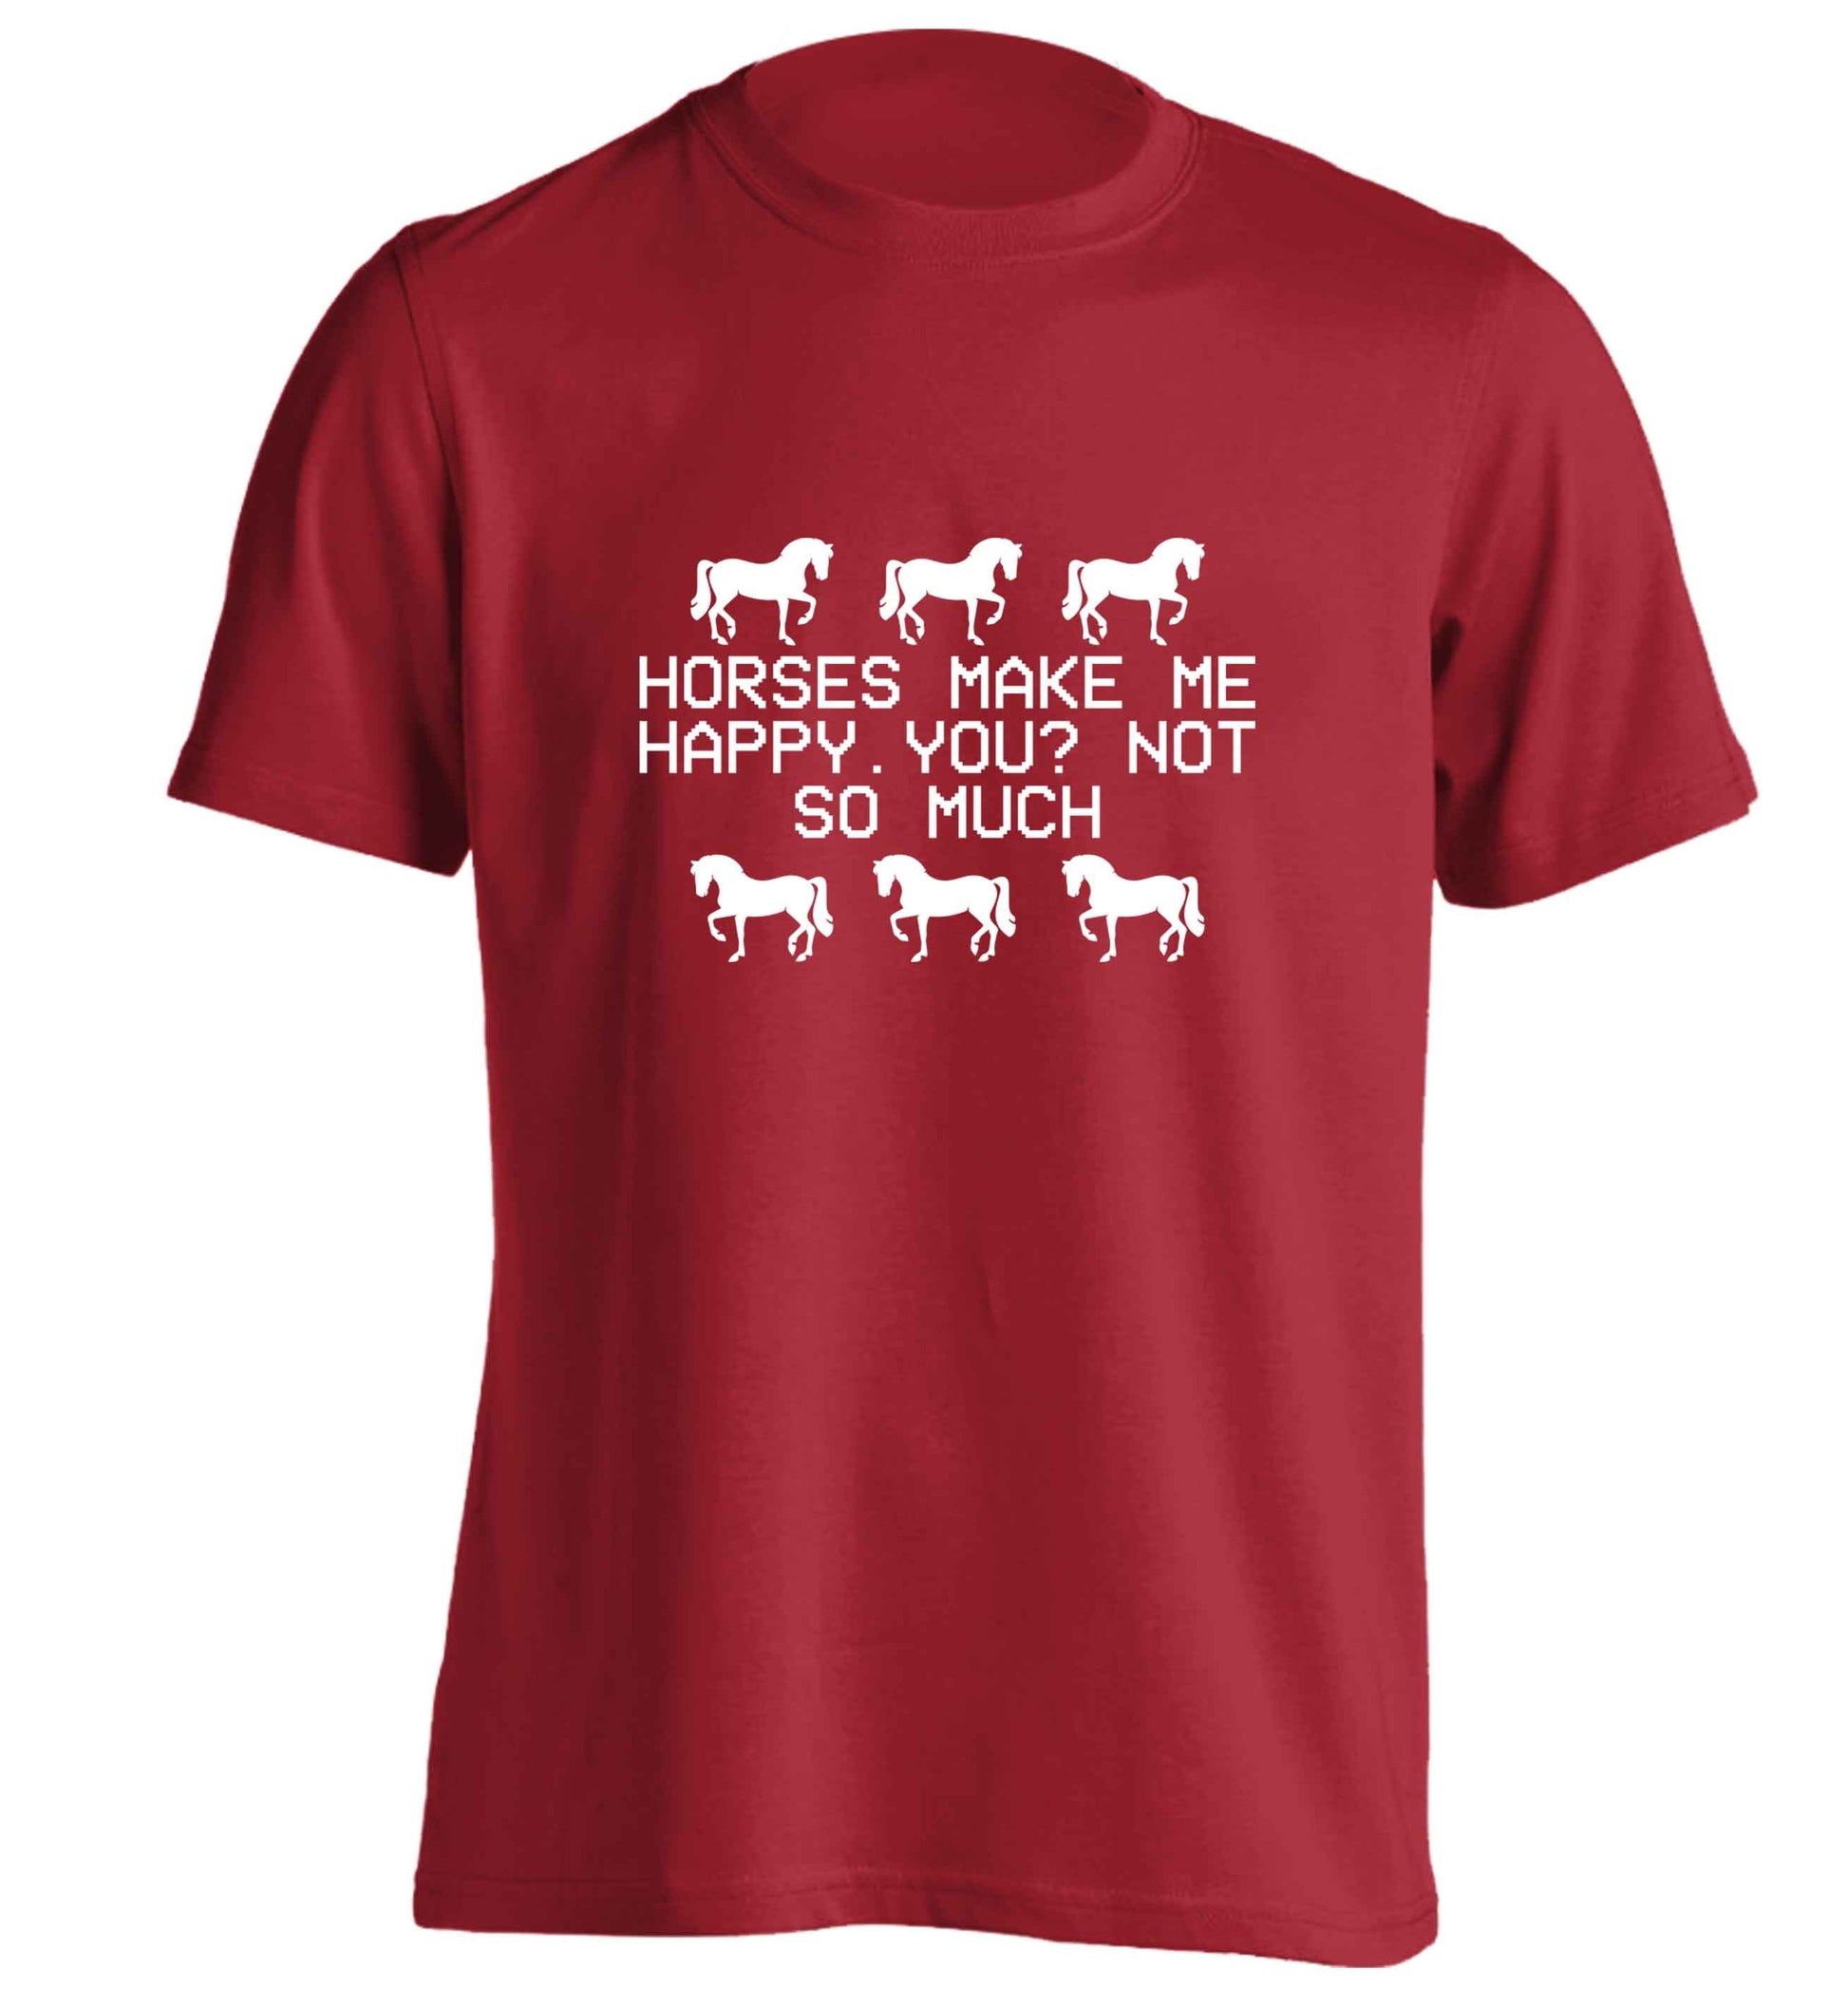 Horses make me happy, you not so much adults unisex red Tshirt 2XL